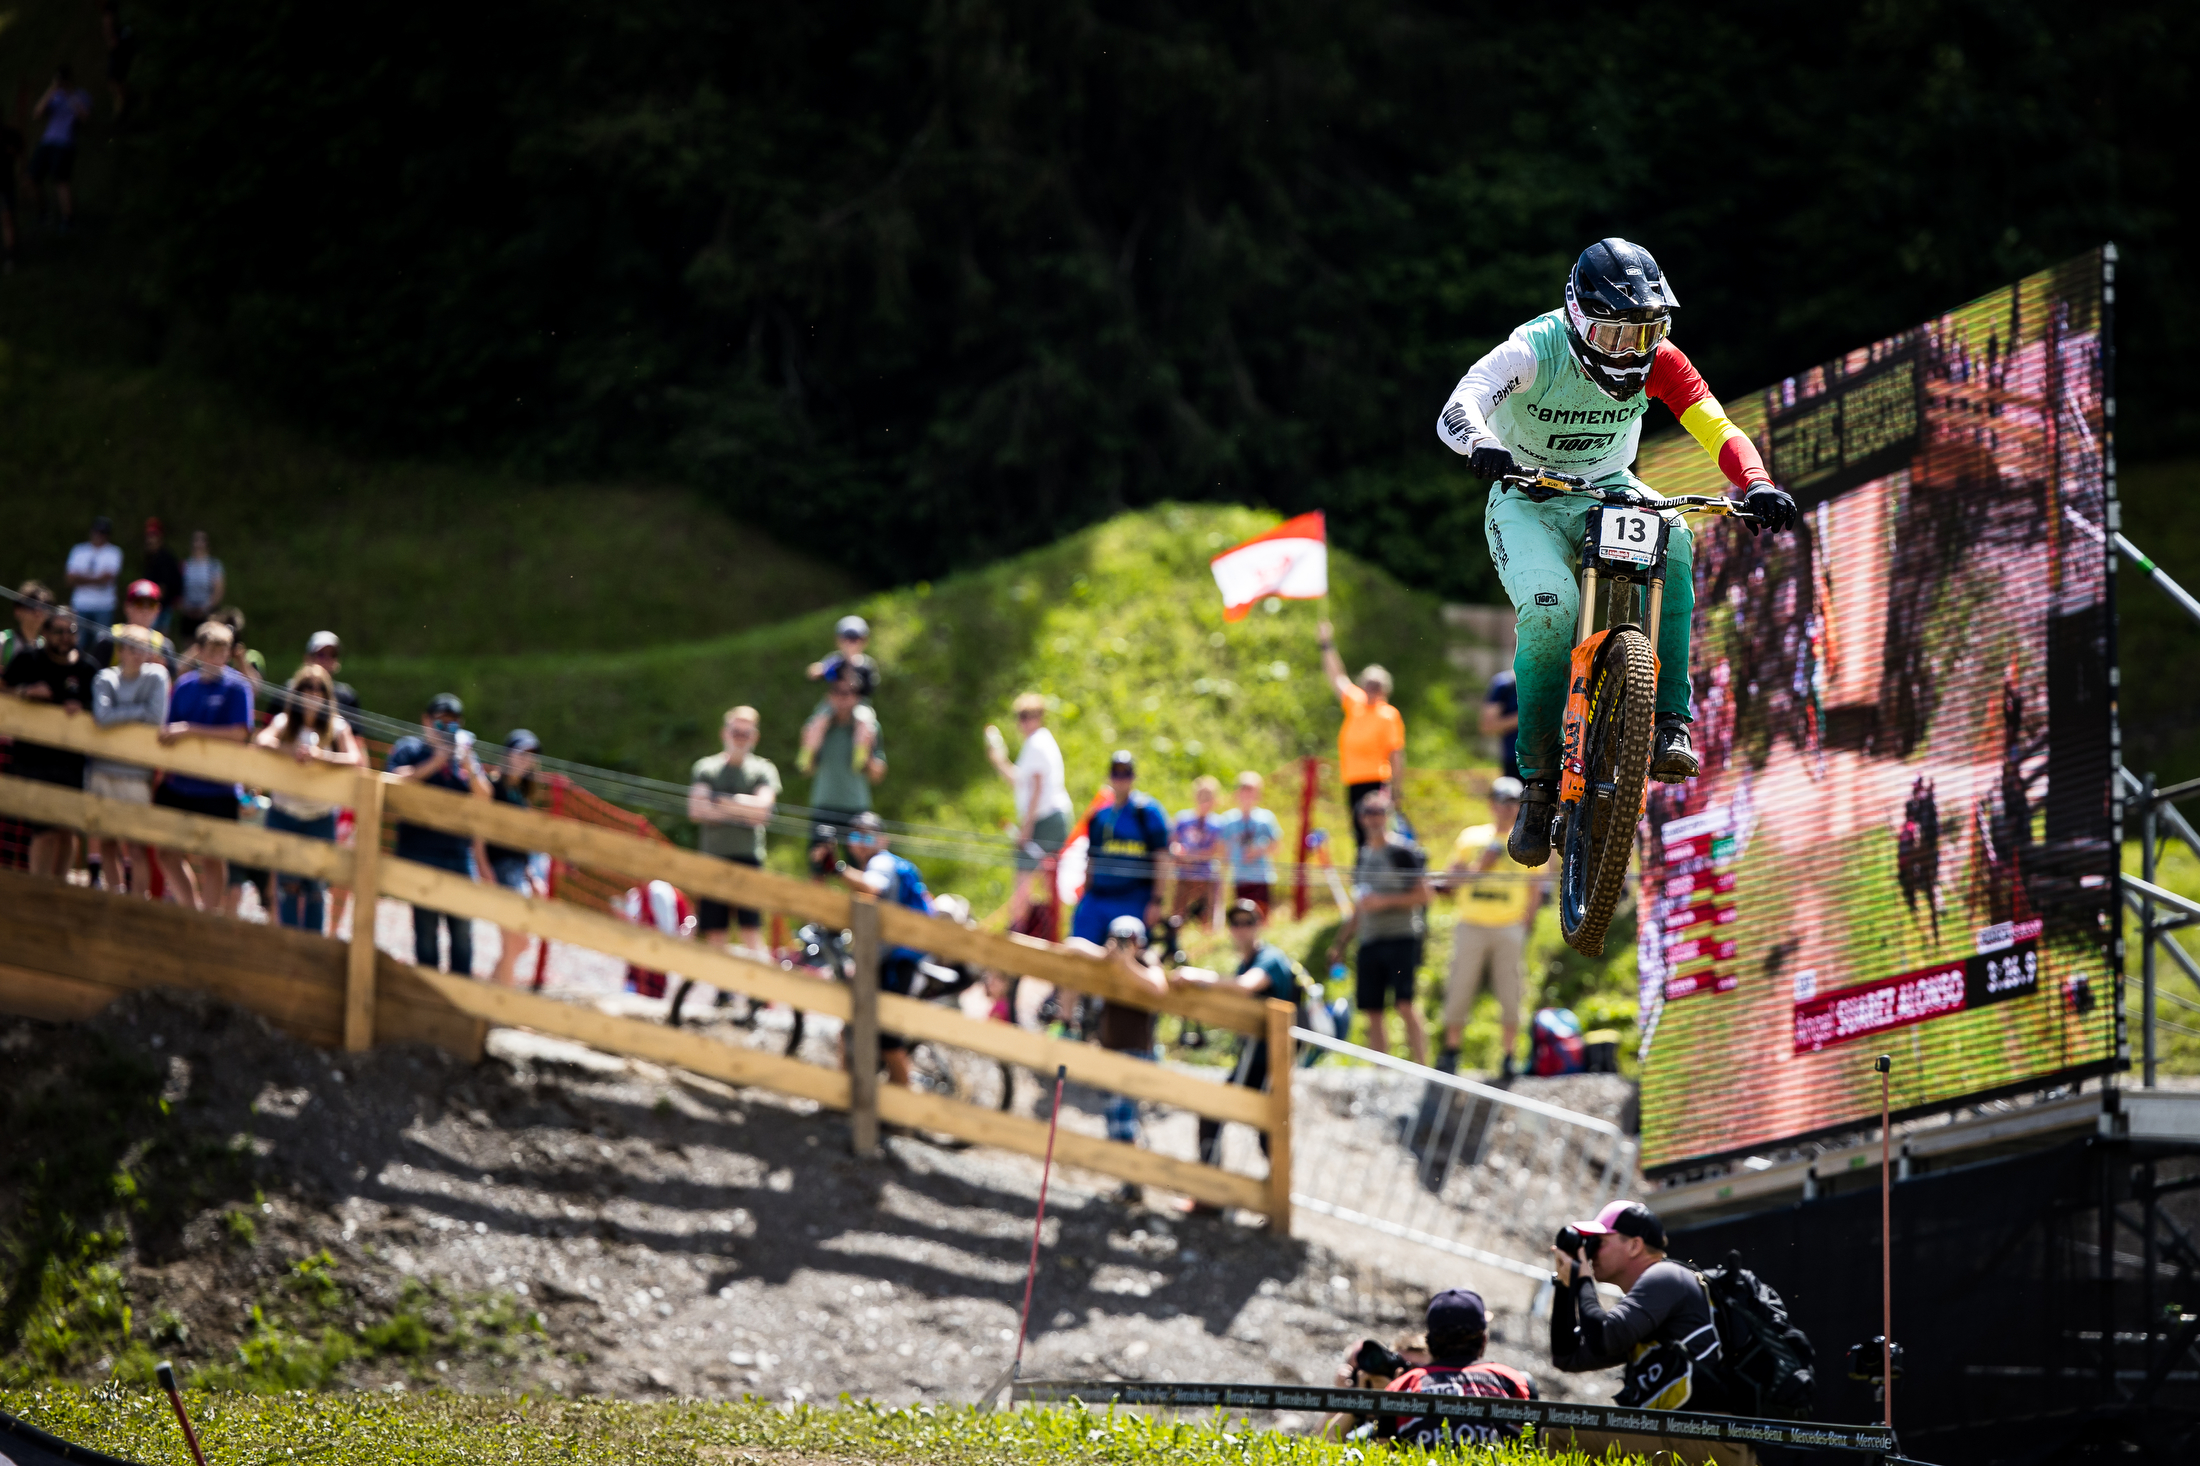 Angel Suarez jumping to an excellent result in Leogang